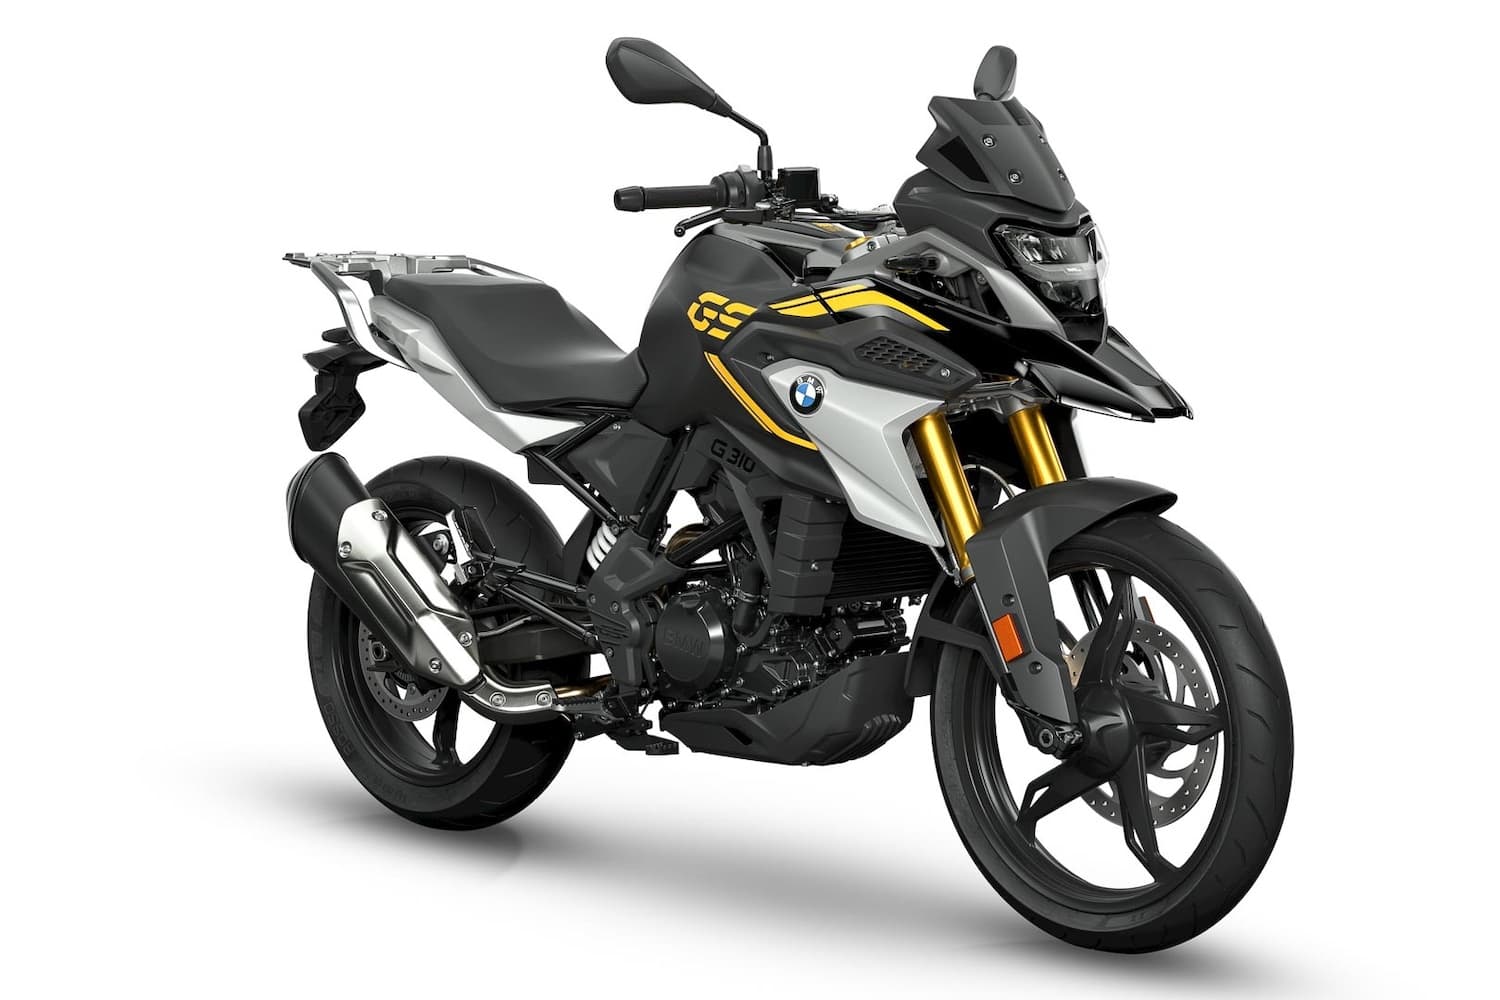 2021 BMW G 310 GS 40 years of GS gold and black, diagonal